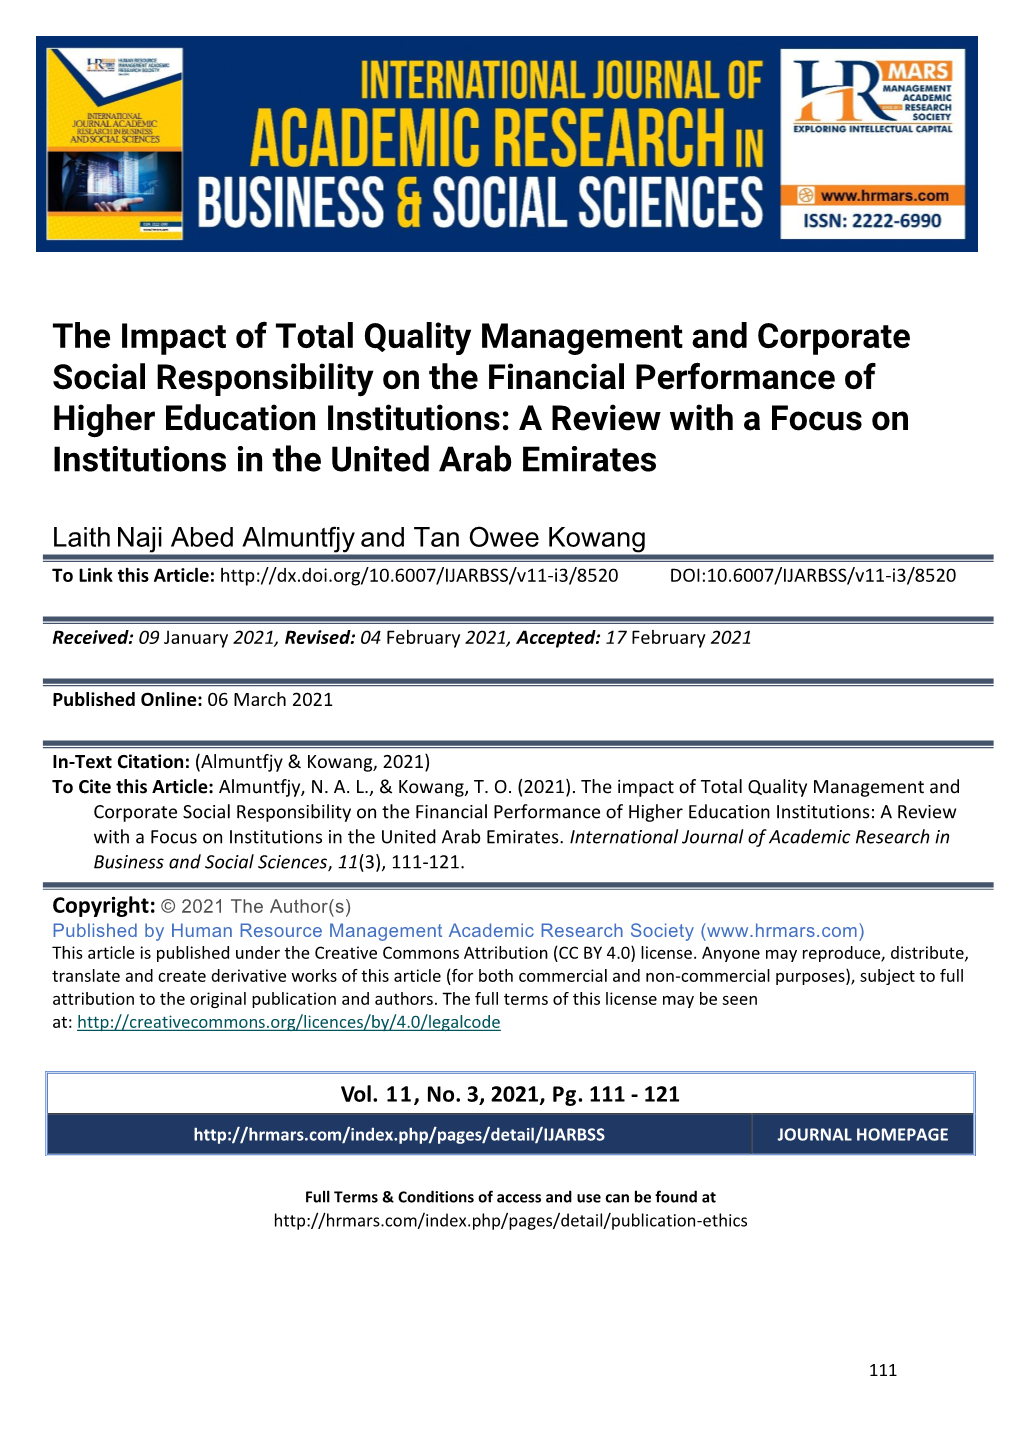 The Impact of Total Quality Management and Corporate